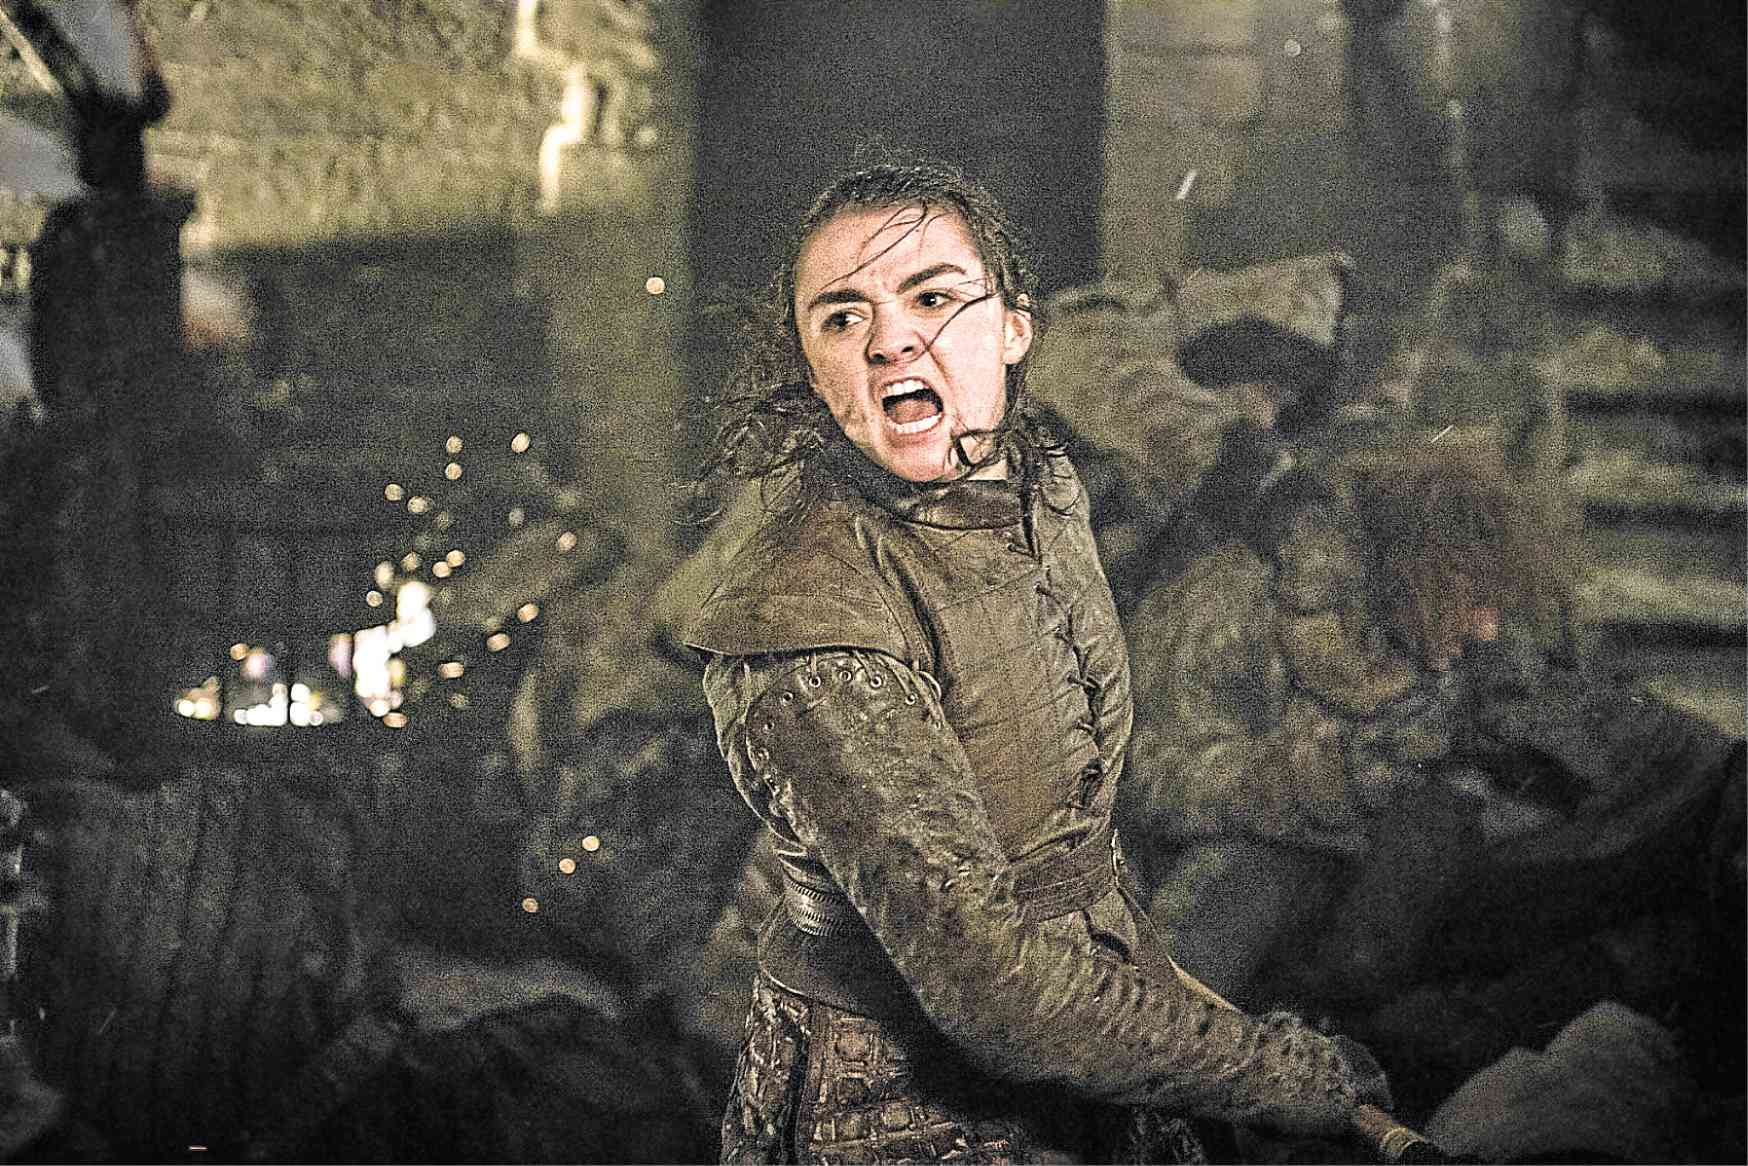 Maisie Williams as Arya Stark in Episode 3, Season 8 of “Game of Thrones” —HBO; PHOTO BY JONATHAN FORD